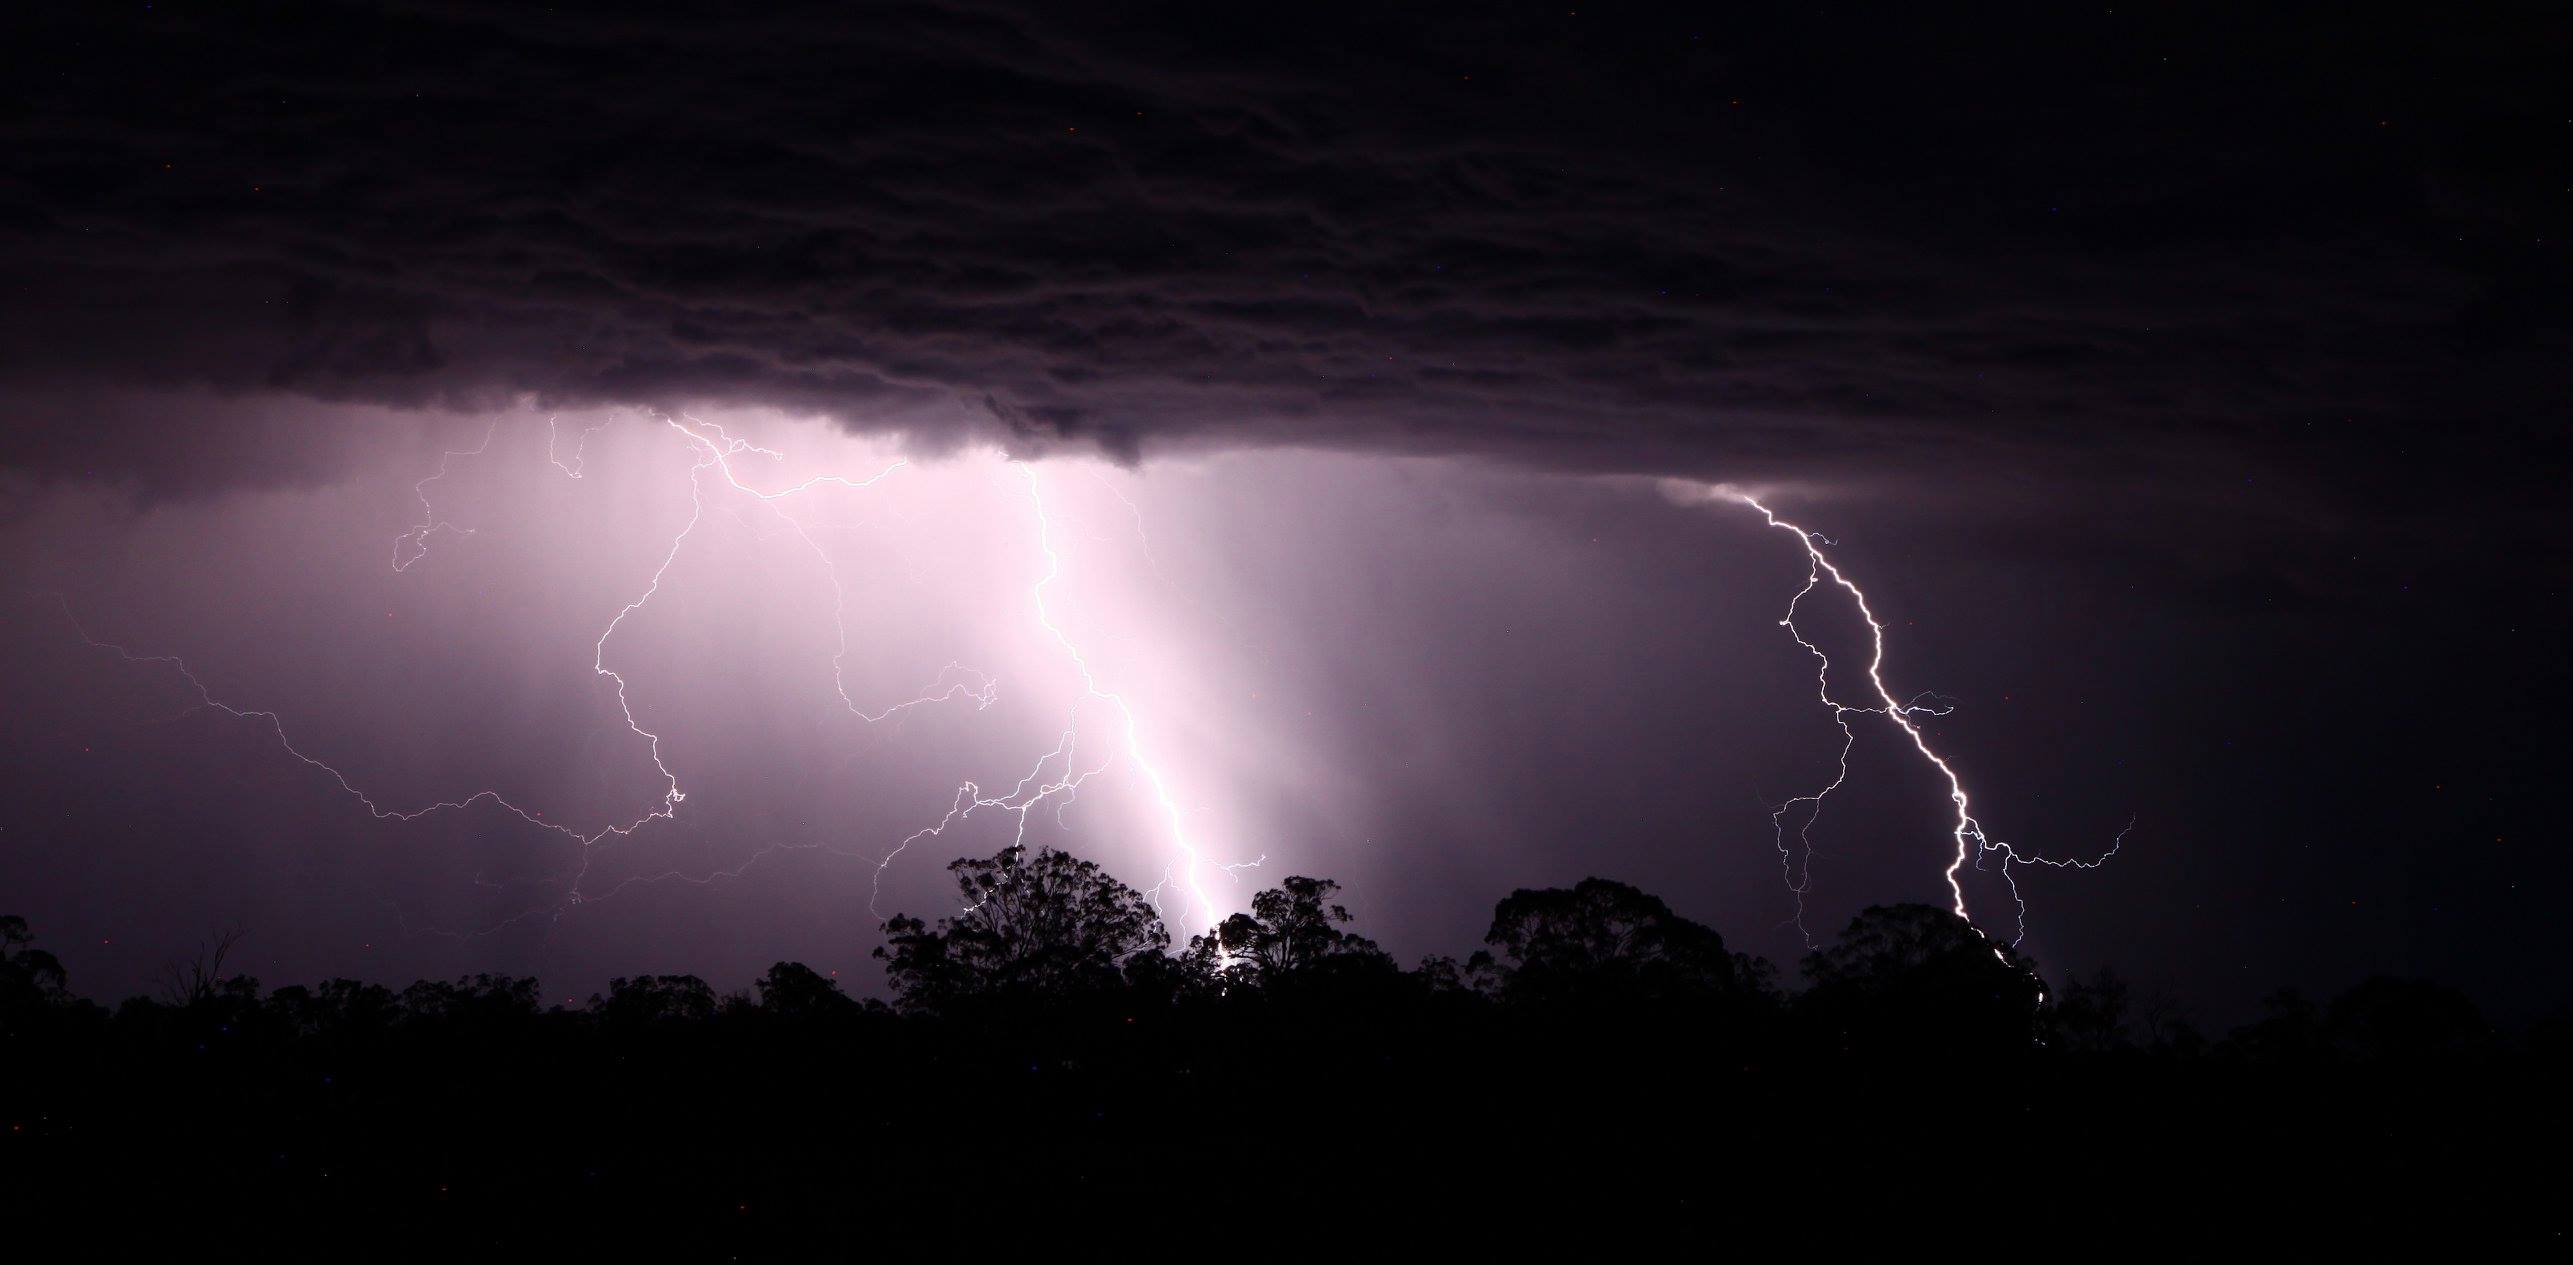 Storms and Lightning Warwick Queensland 21st December 2016 - Extreme Storms2573 x 1265